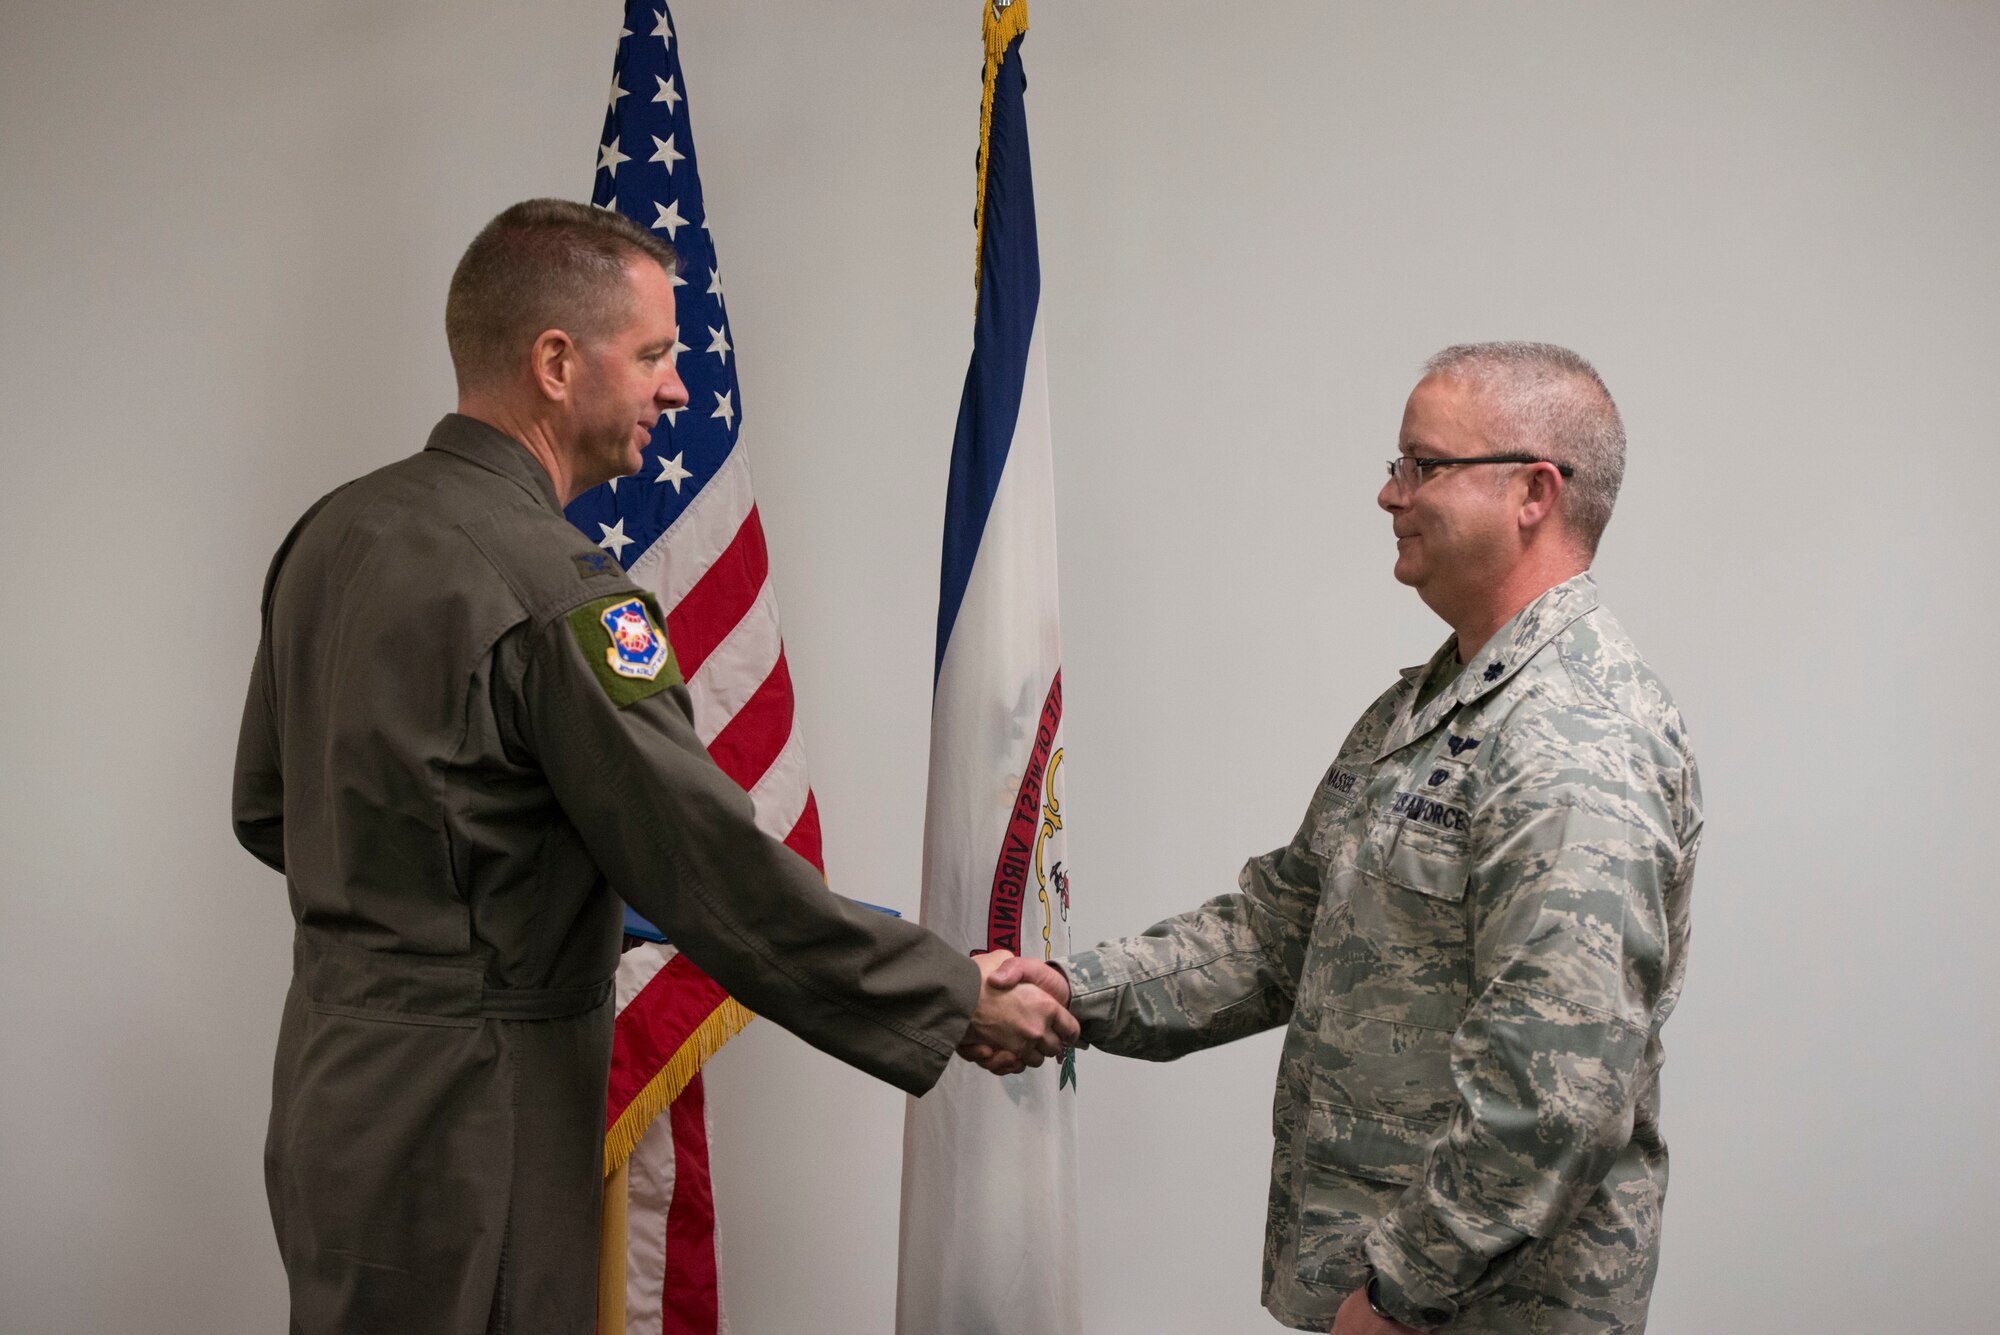 Col. Marty Timko, 167th Airlift Wing commander, congratulates Lt. Col. Charles Nasser during a ceremony marking Nasser’s assumption of command of the 167th Mission Support Group, Feb. 1, 2020.